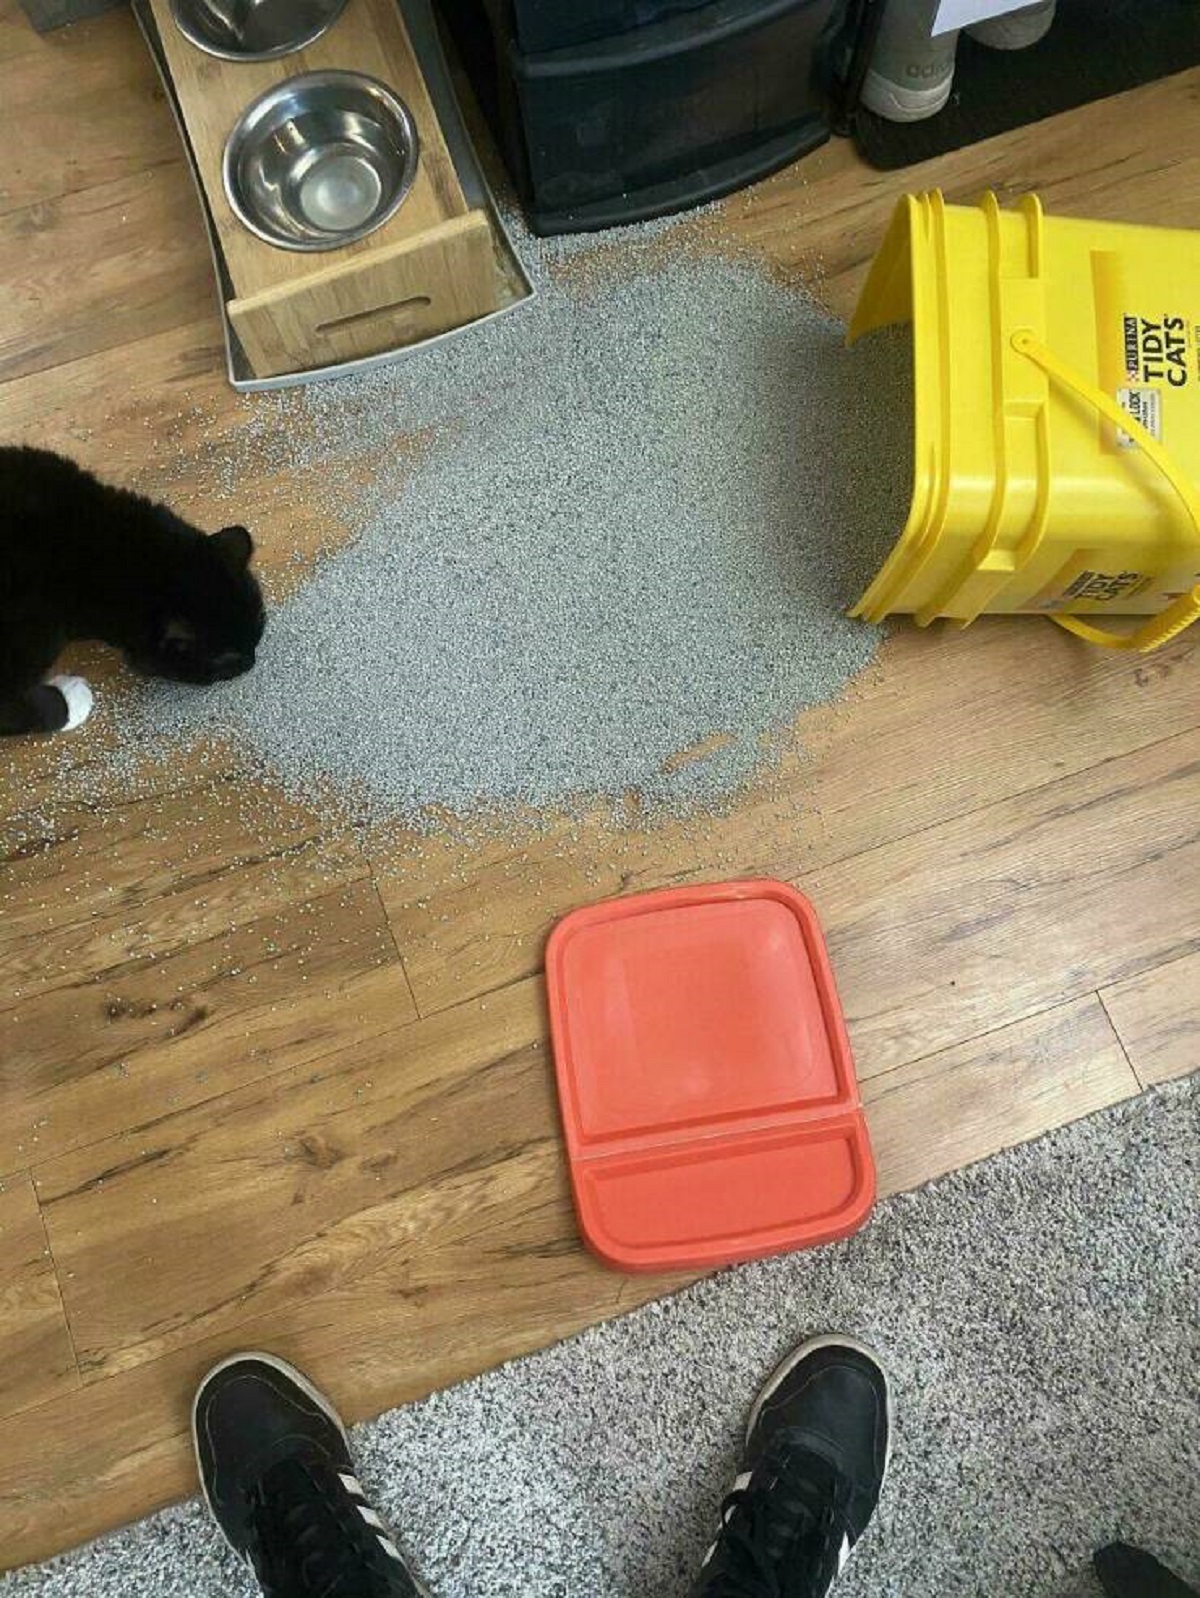 "I Have 30 Seconds To Sweep This Up Before The Cat Pees On It"